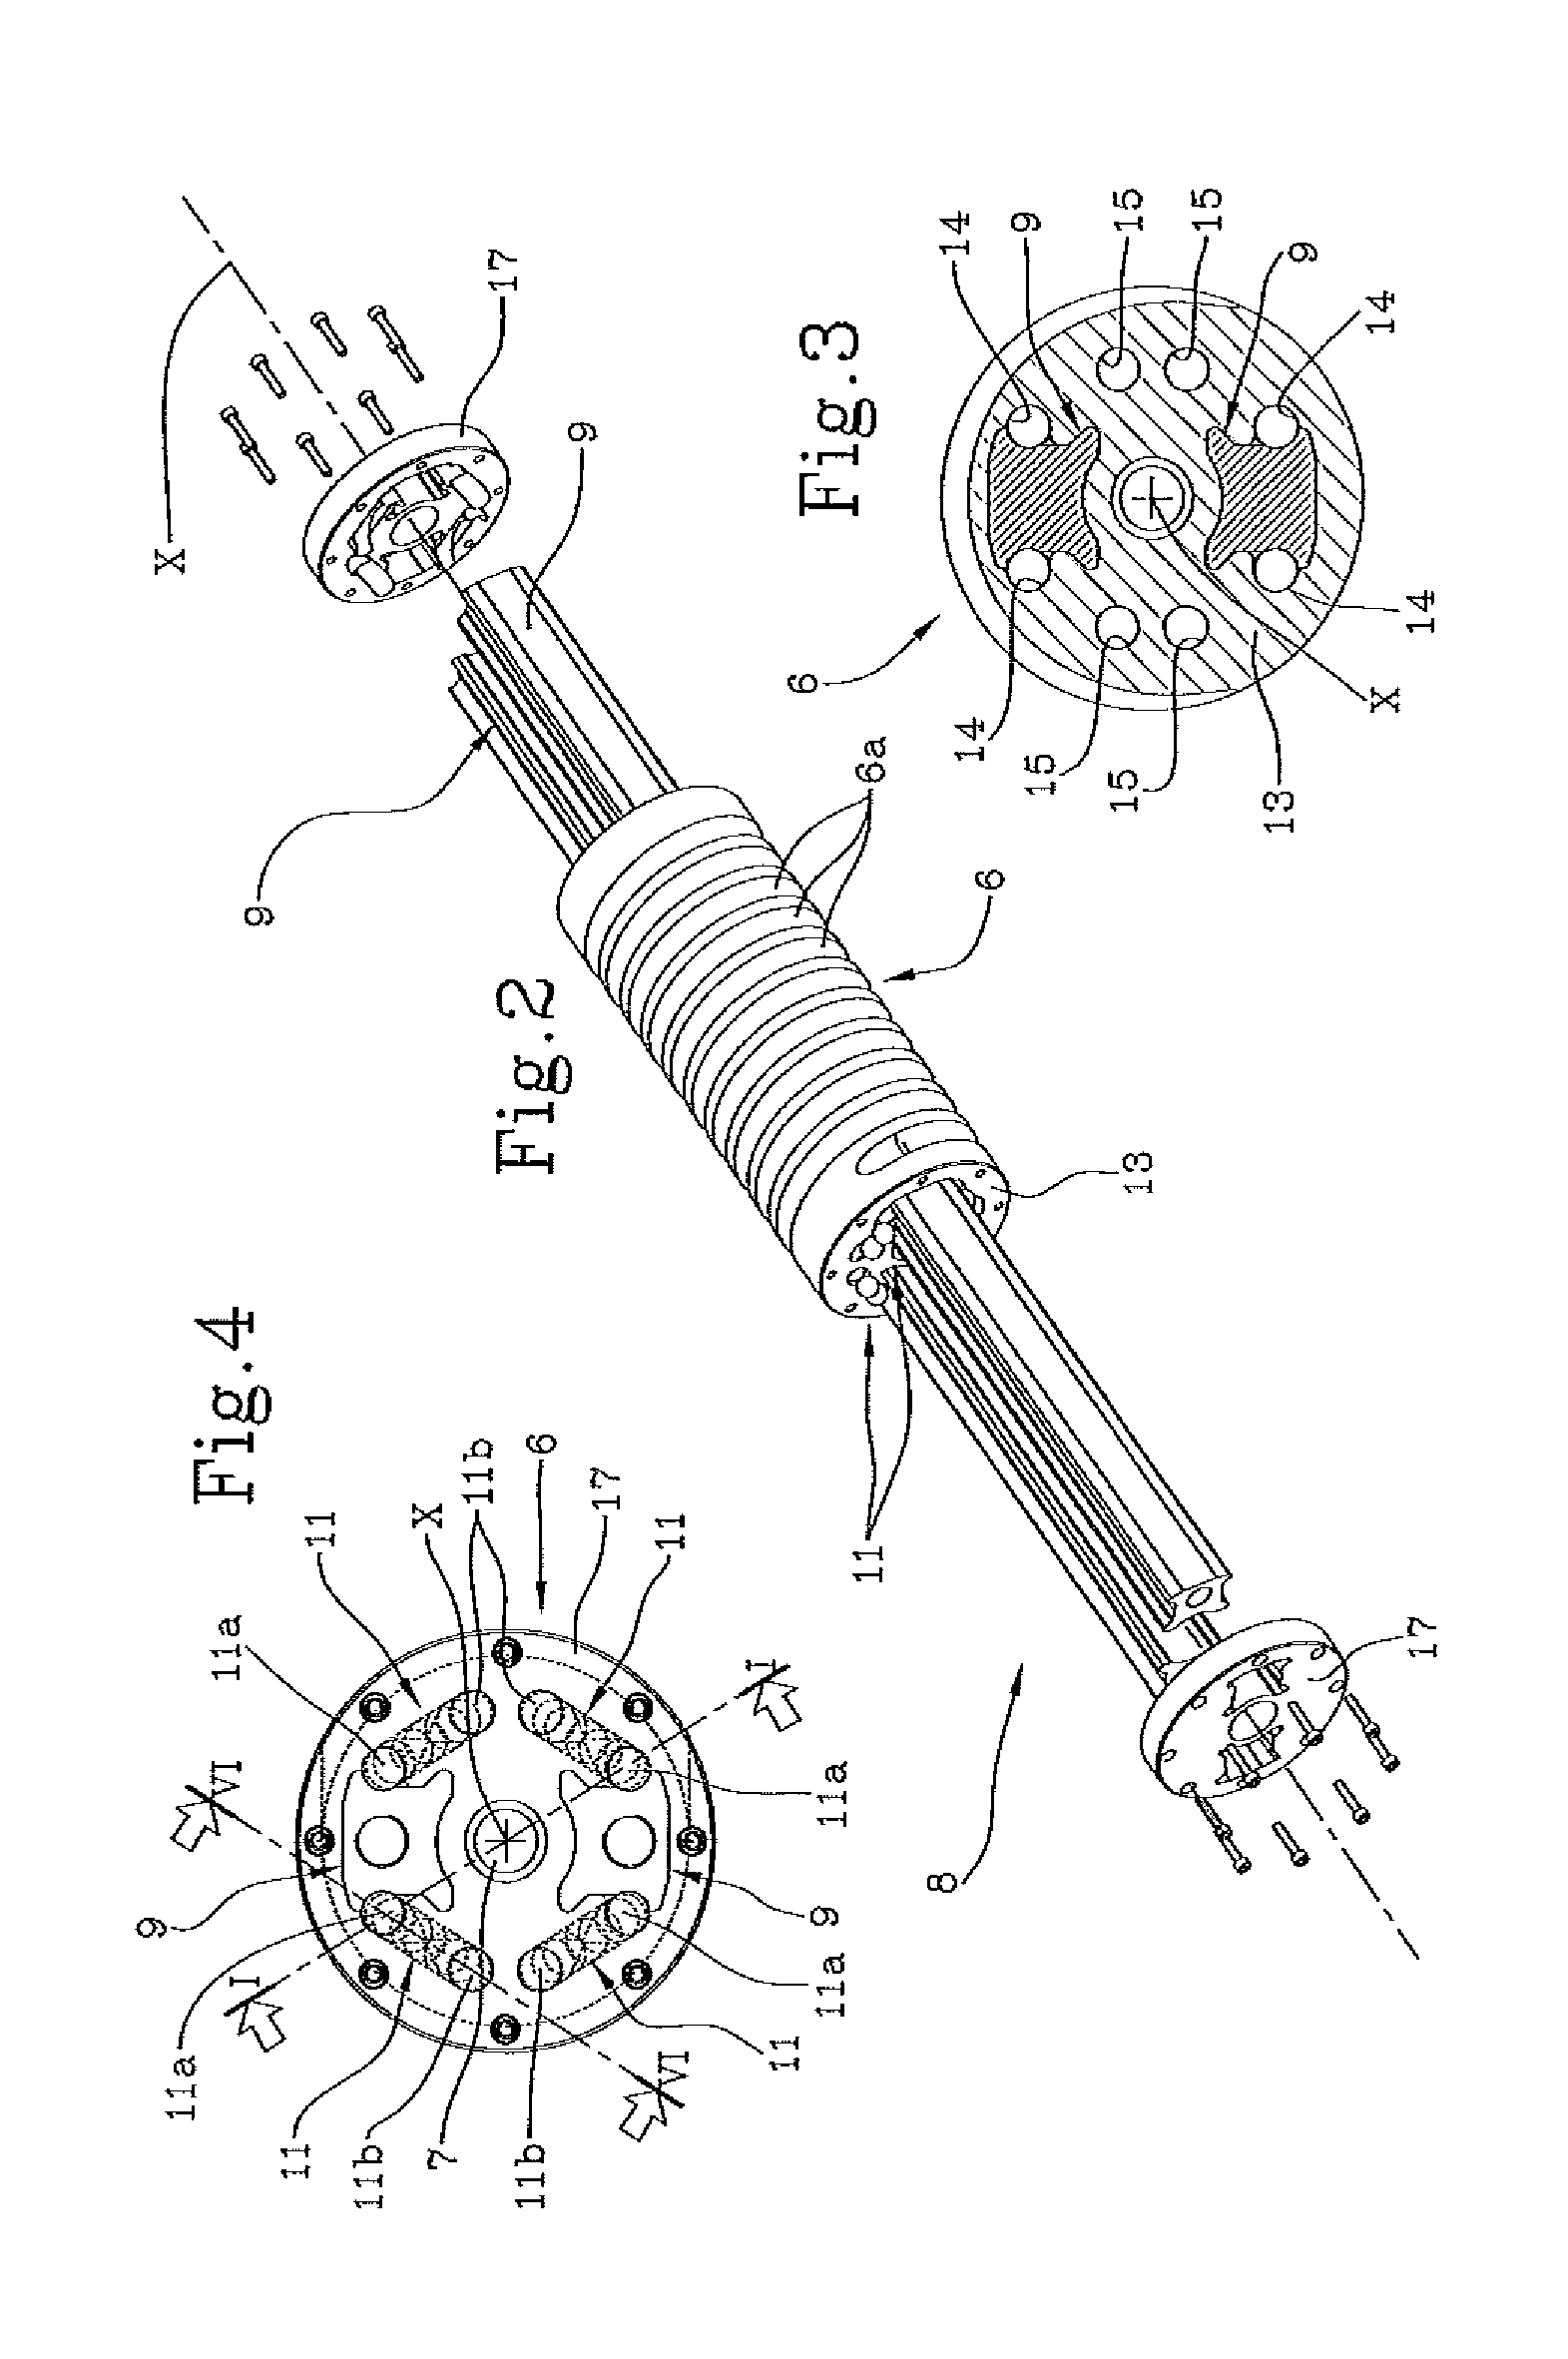 Linear electro-mechanical actuator with built-in anti-rotation